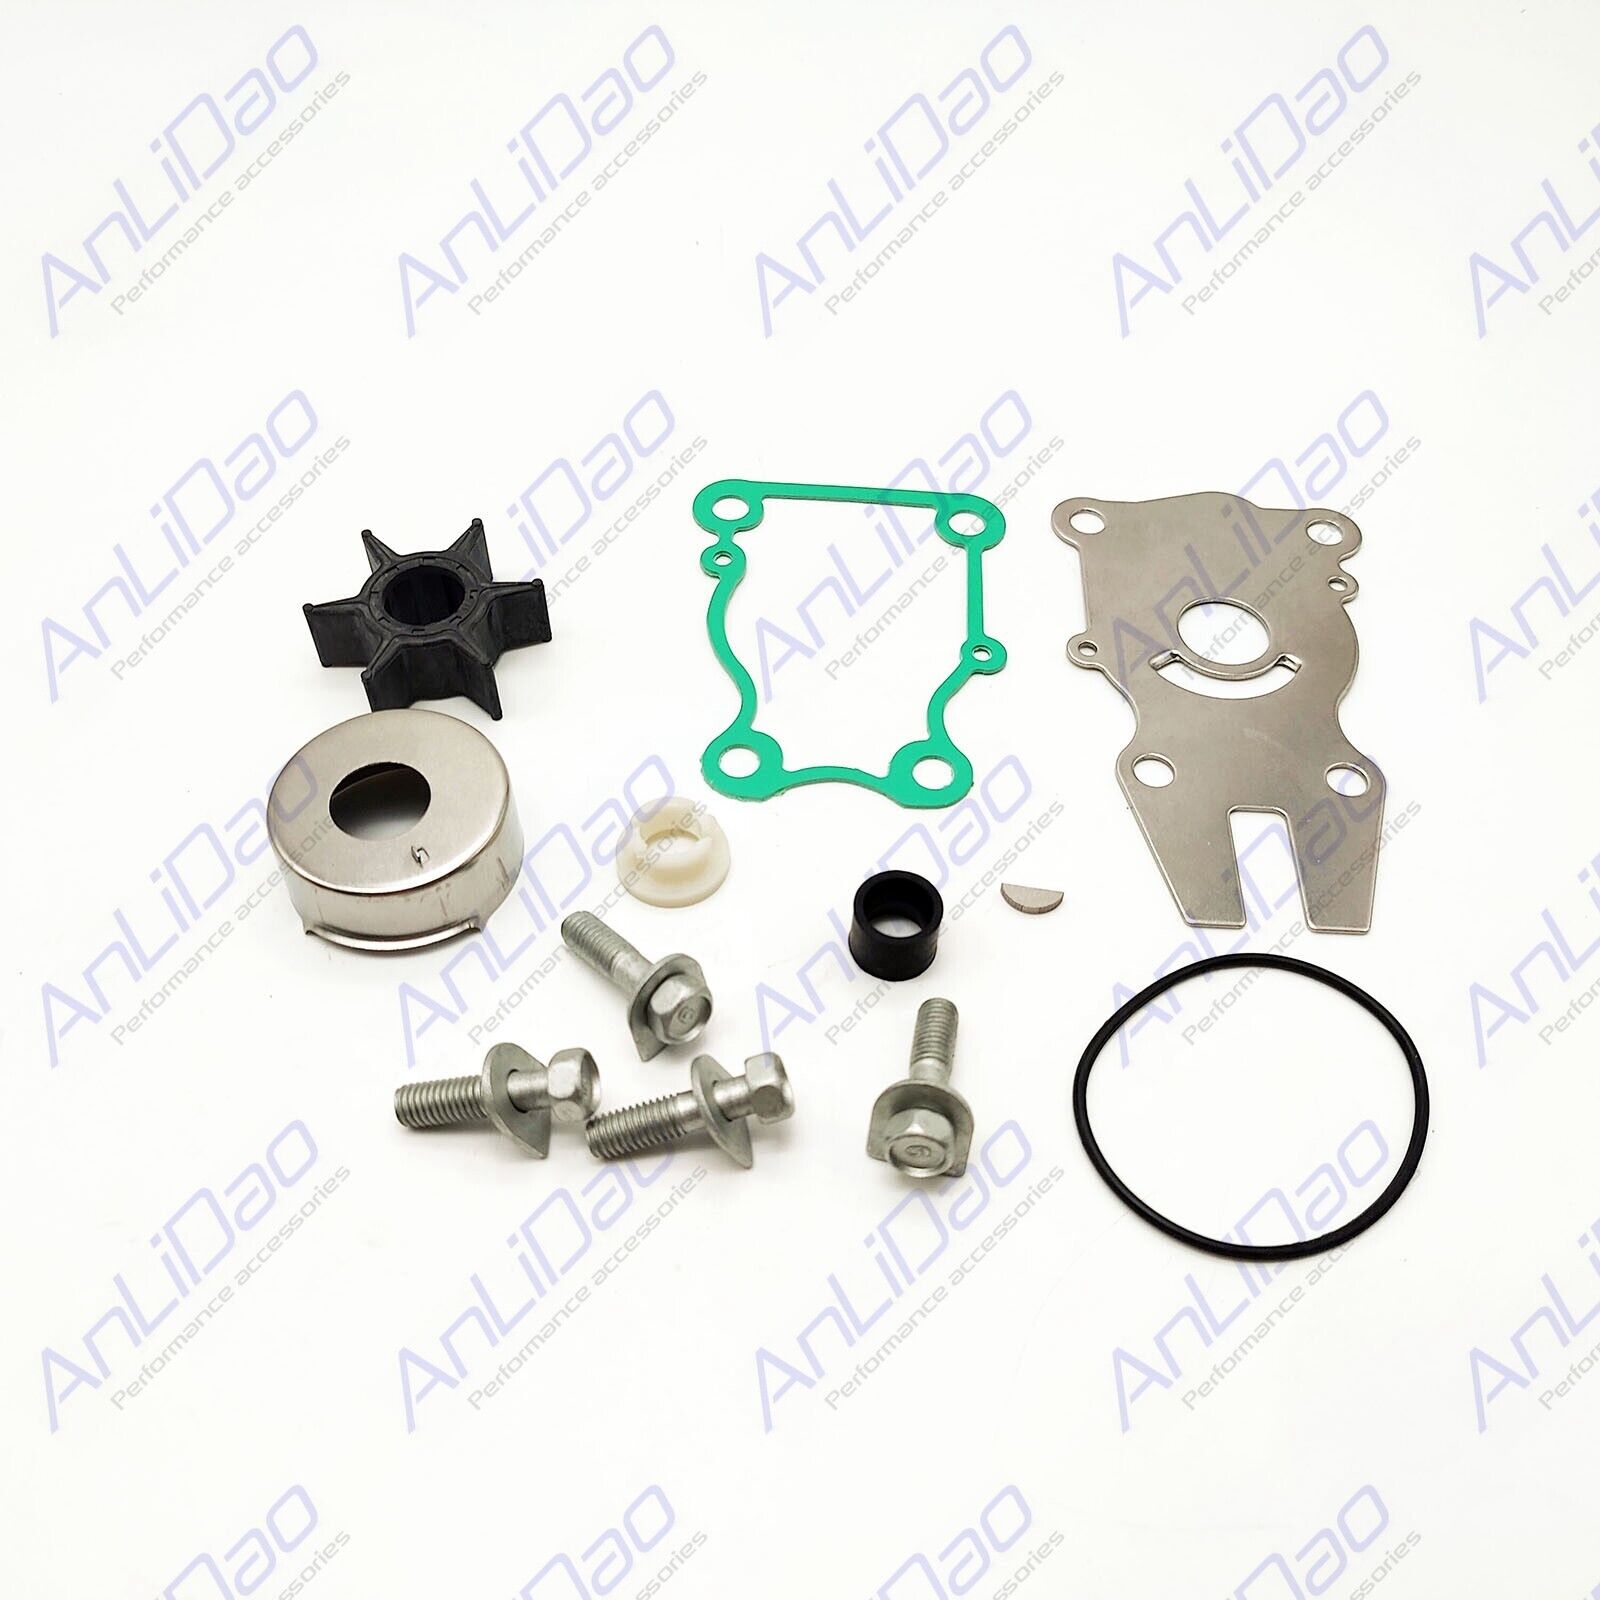 63D-W0078-01-00 Fit For Yamaha 40 C40 50 C50 T50 Outboard Water Pump Repair Kit